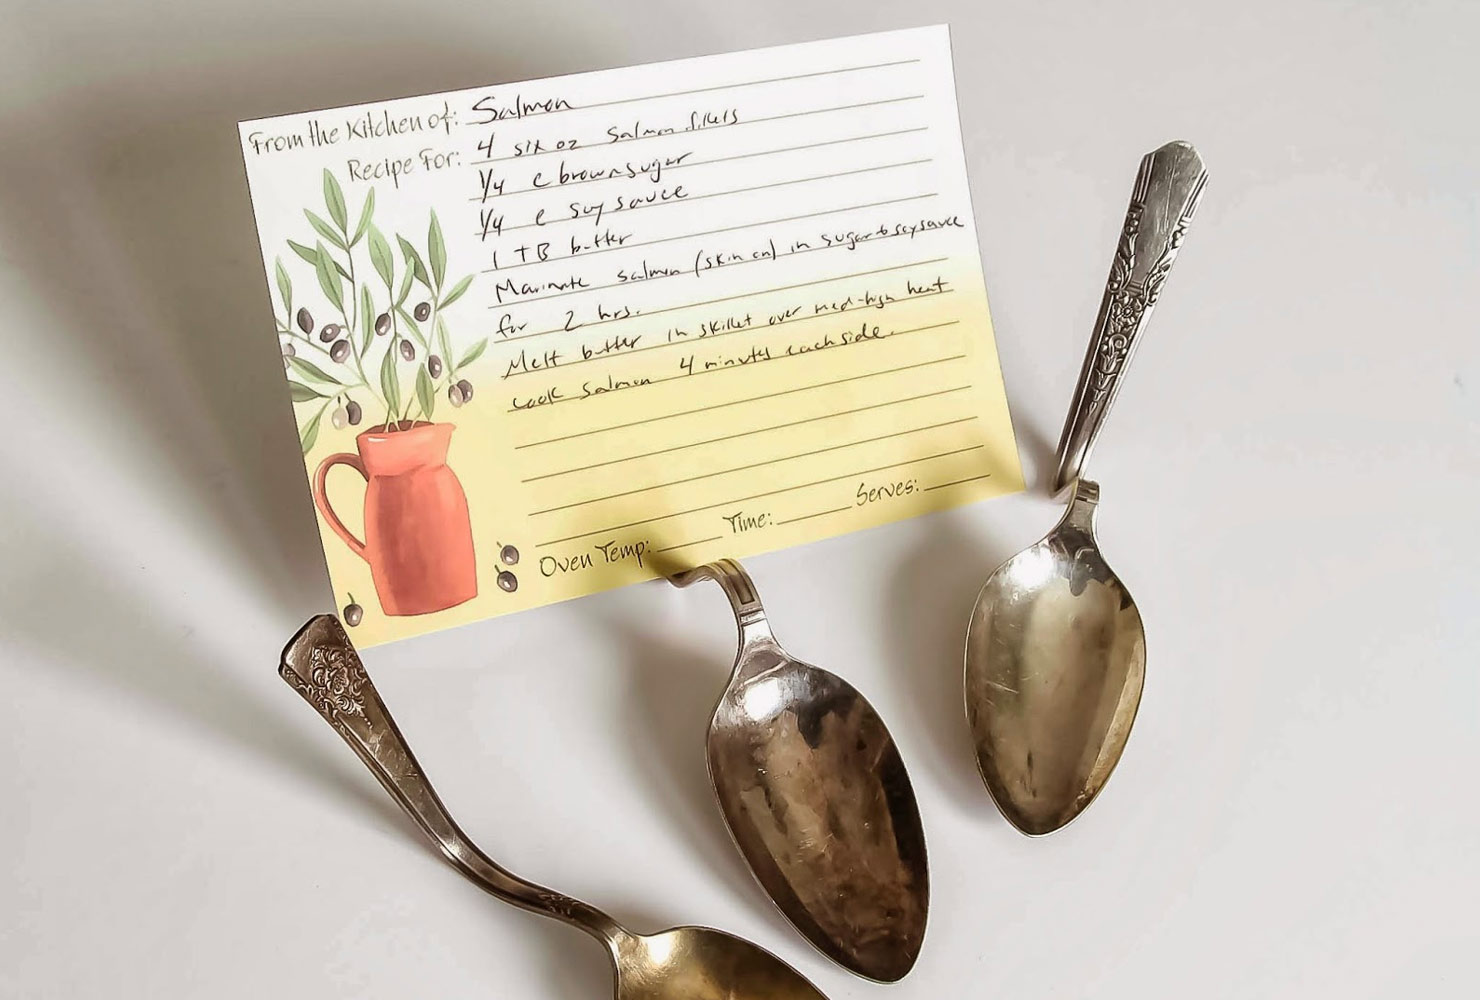 Antique spoons and recipe card.